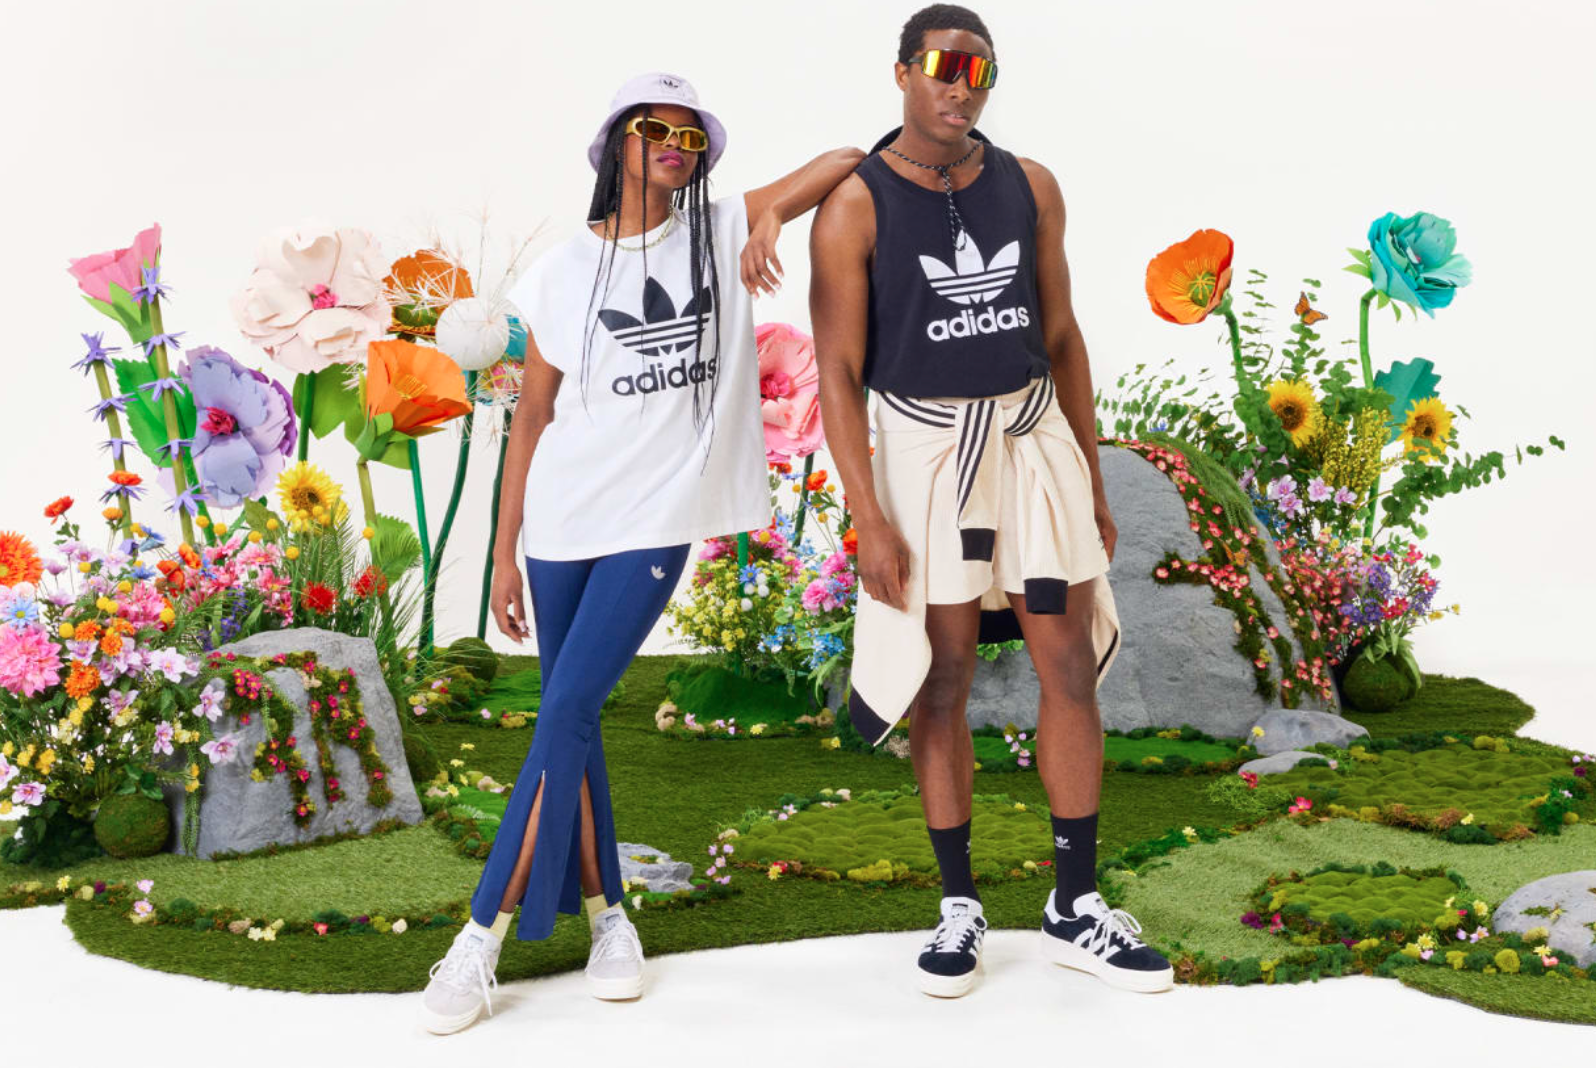 Score Big with Adidas Sale: Earn Rewards and Save Up to 55% with Lolli!